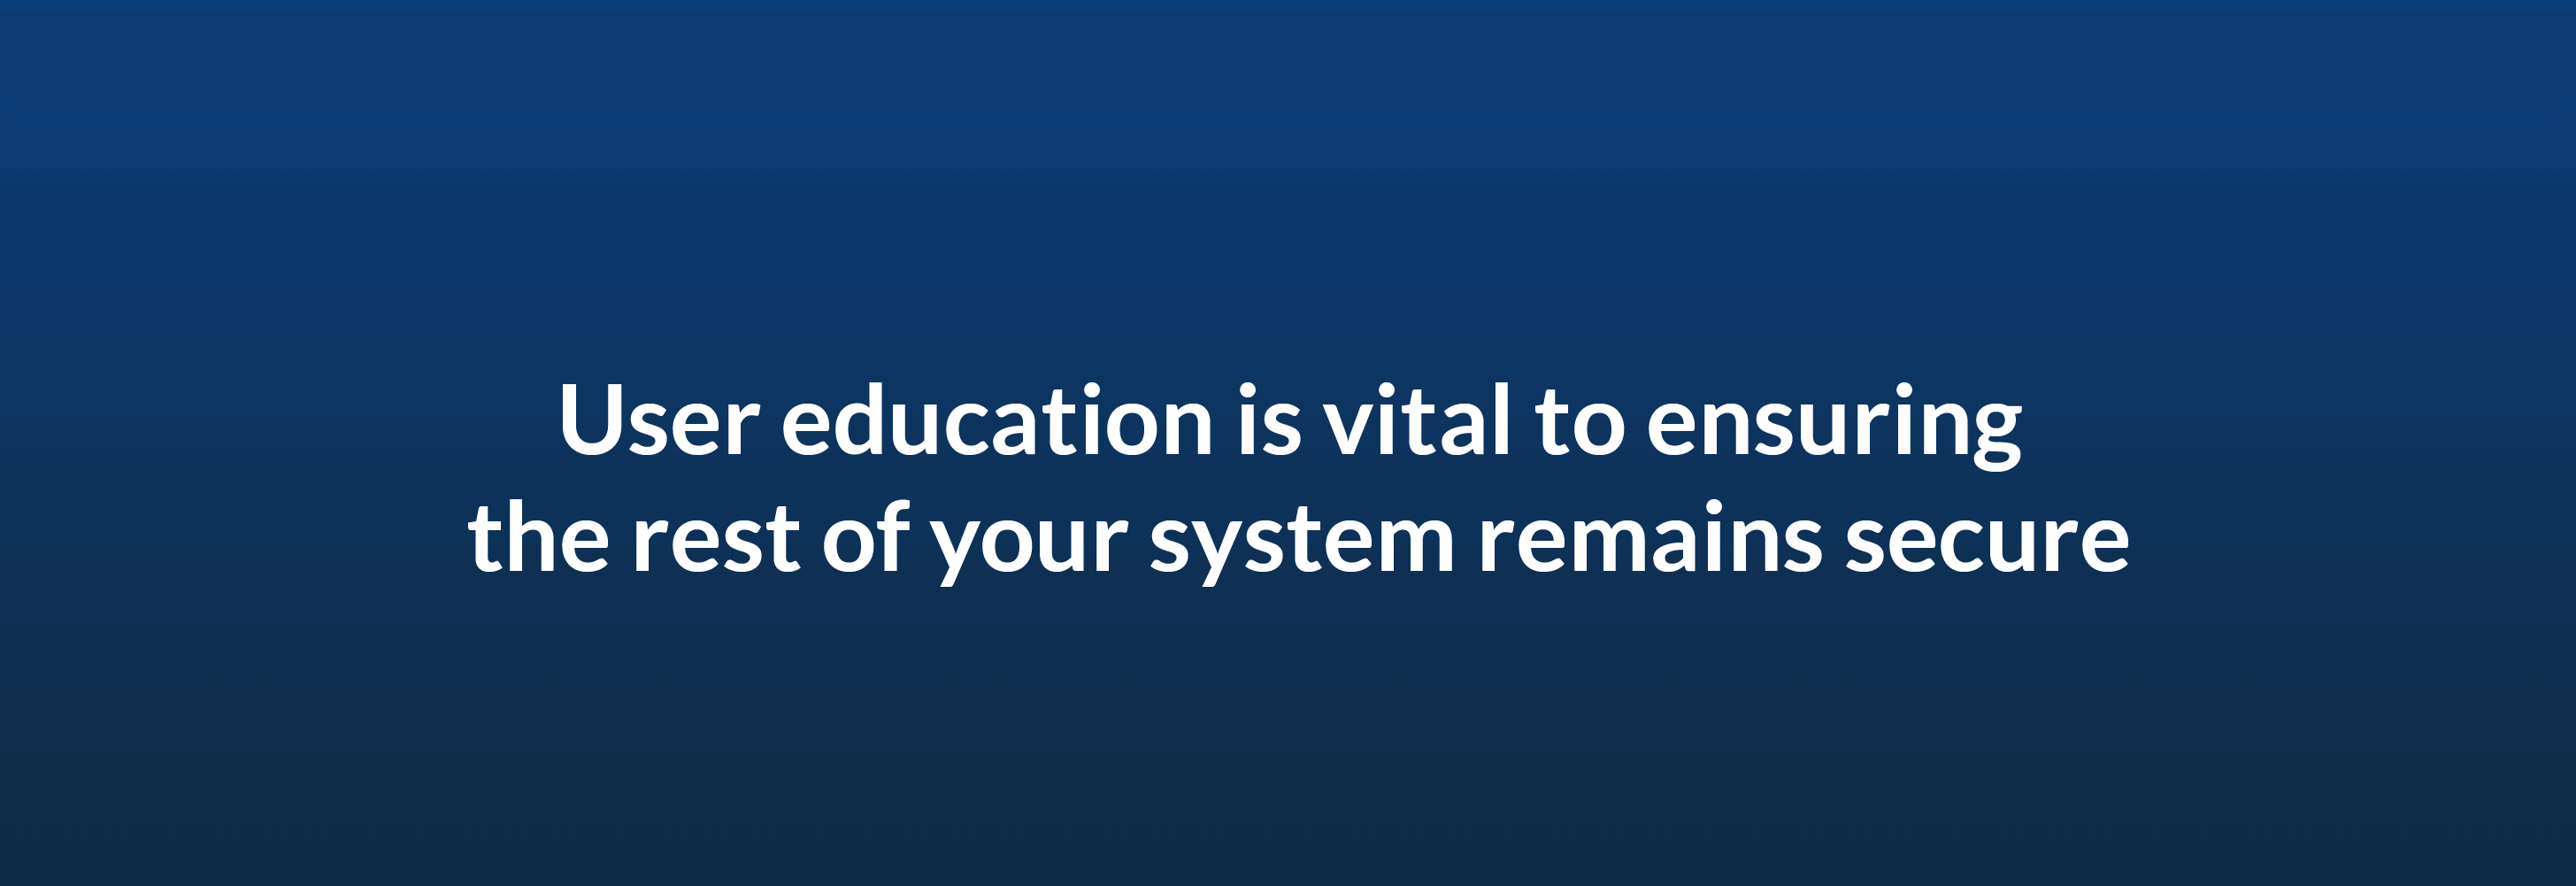 User education is vital to ensuring the rest of your system remains secure